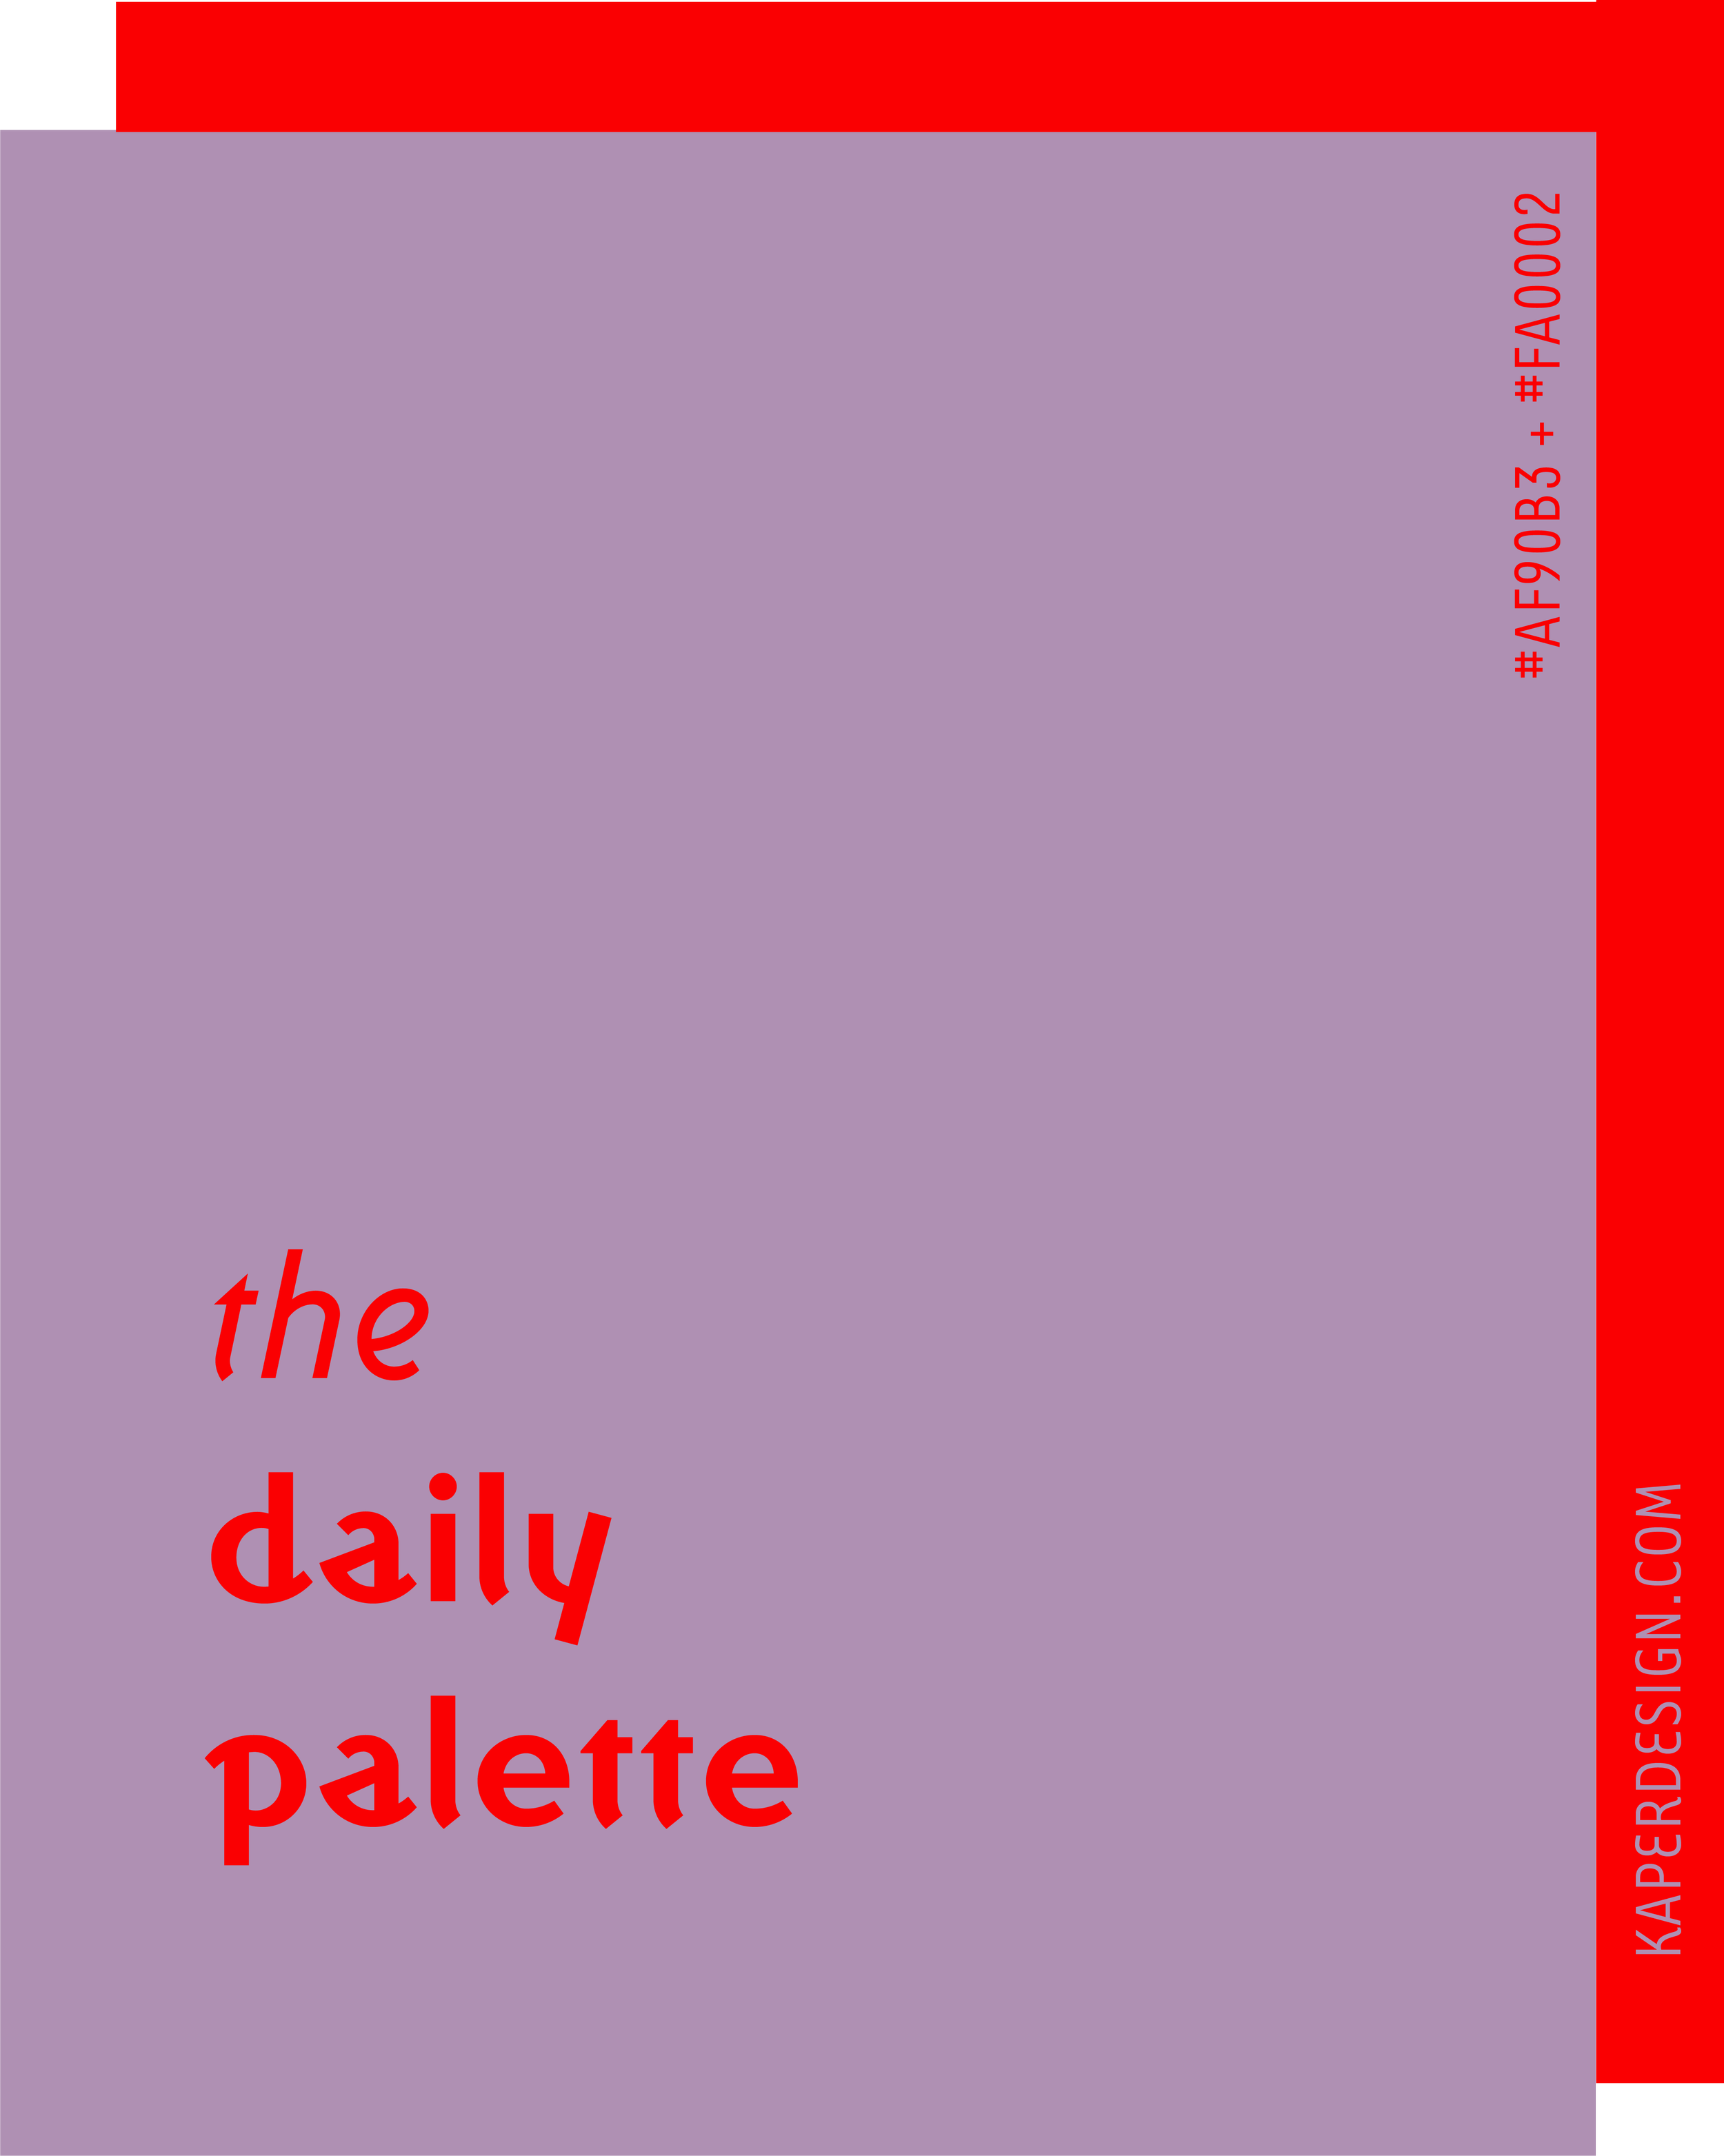 Kaper Design_the Daily Palette Project-16.png